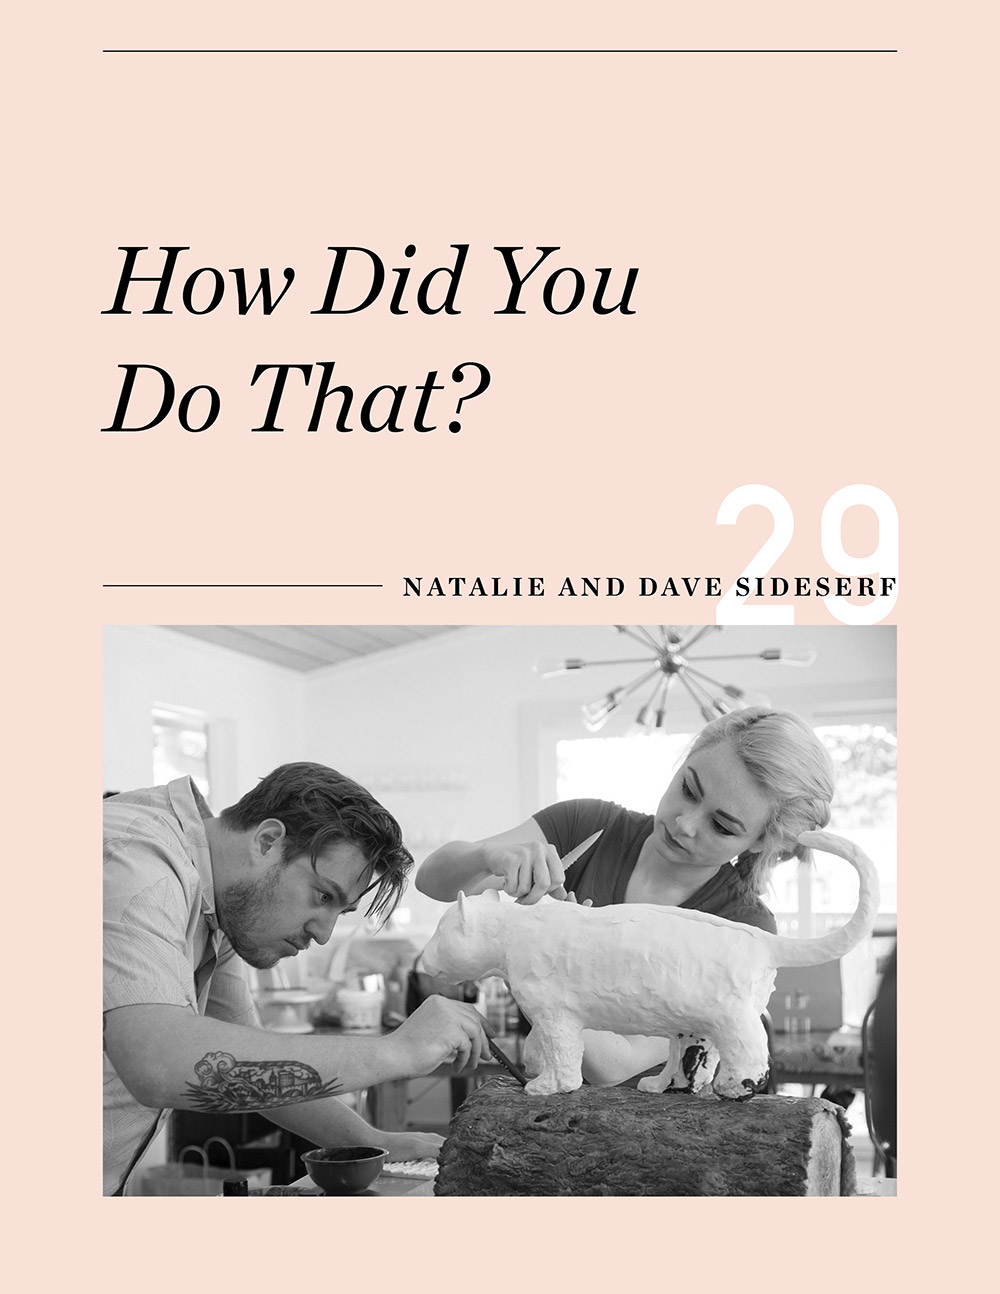 Ellen Fondiler | How Did You Do That: An Interview With Natalie & Dave Sideserf